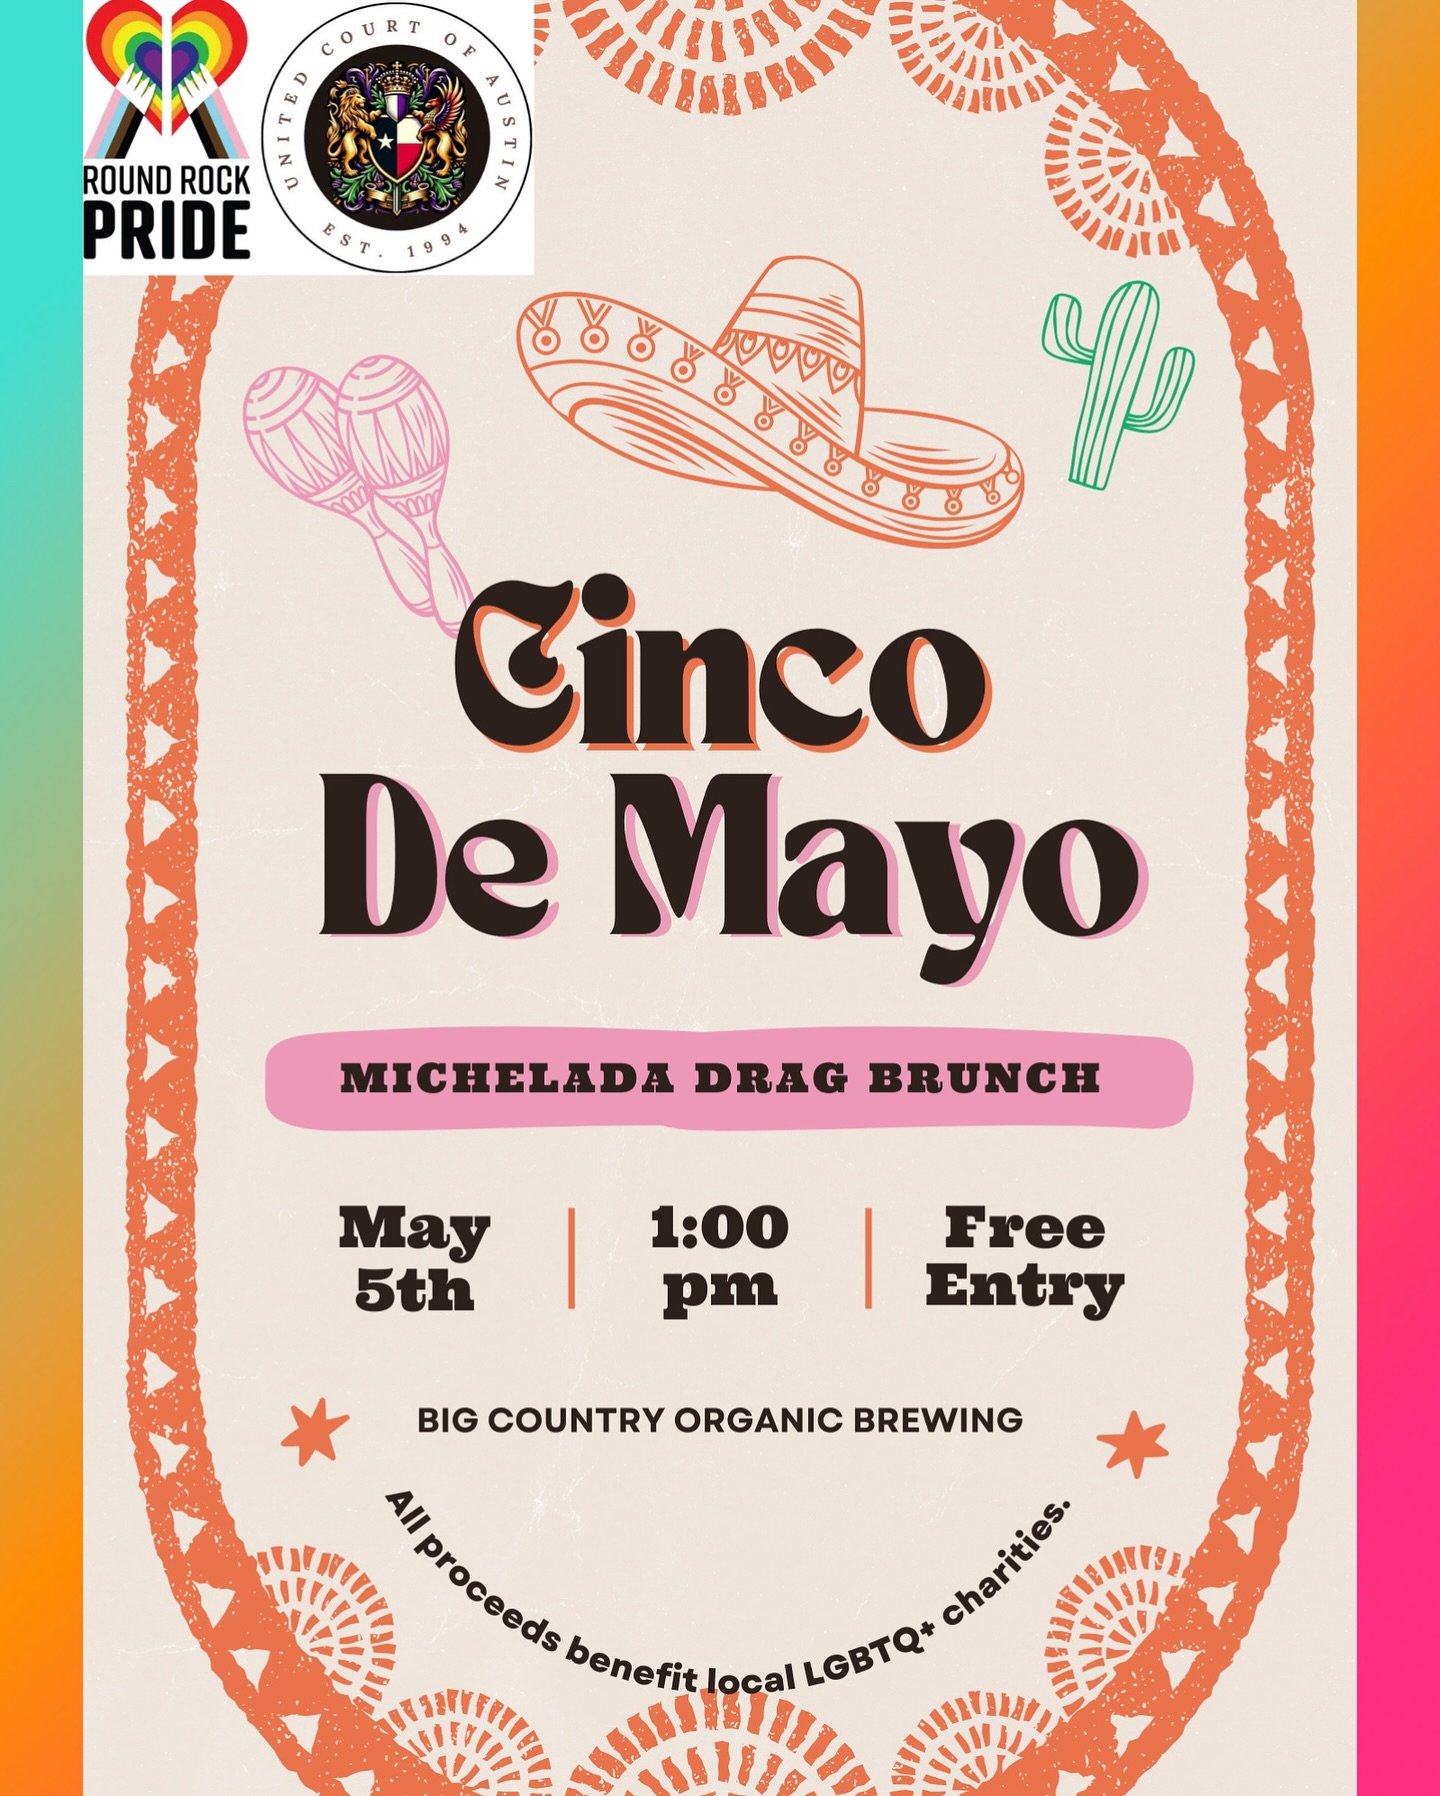 All tips and proceeds raised will benefit UCA charities. 

The United Court of Austin and Round Rock Pride Presents: 

✨Join us for an electrifying Cinco de Mayo Drag Brunch extravaganza! 
Celebrate the spirit of Mexico and the artistry of drag in a 